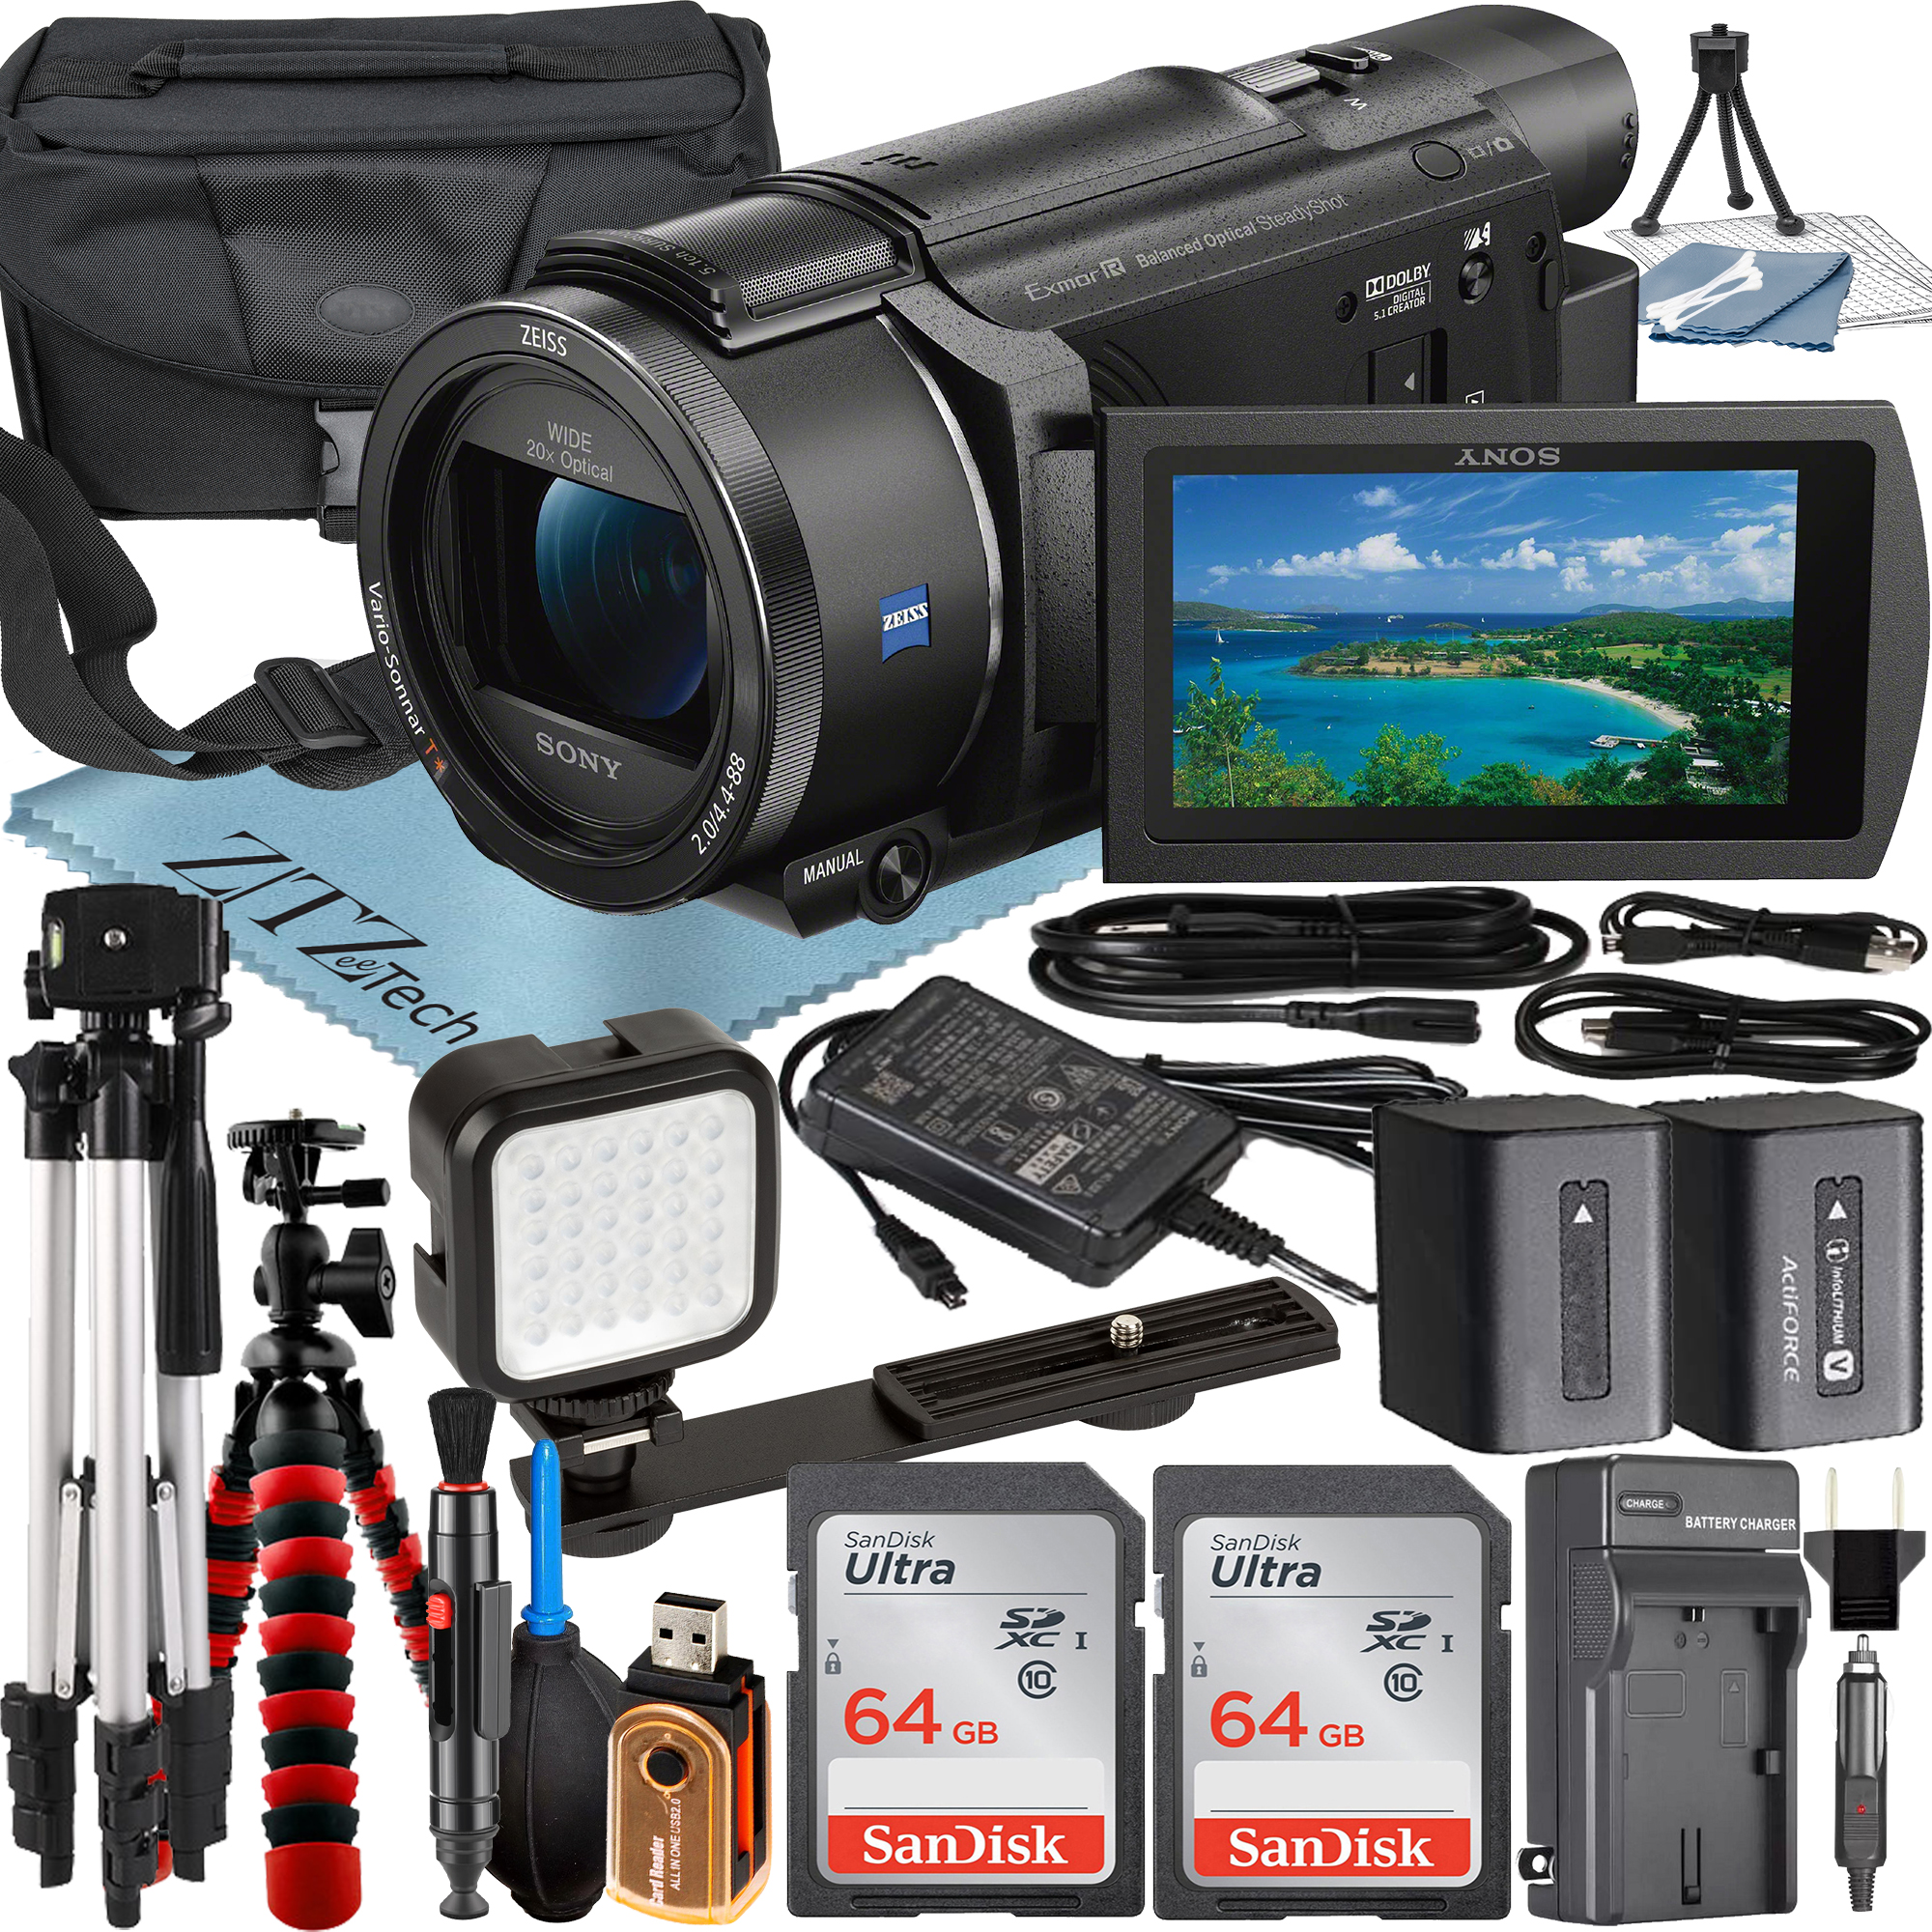 Sony FDR-AX53 4K Ultra HD Handycam Camcorder with 2 Pack 64GB SanDisk Memory Card + LED Light Flash + Case + Tripod + ZeeTech Accessory Bundle